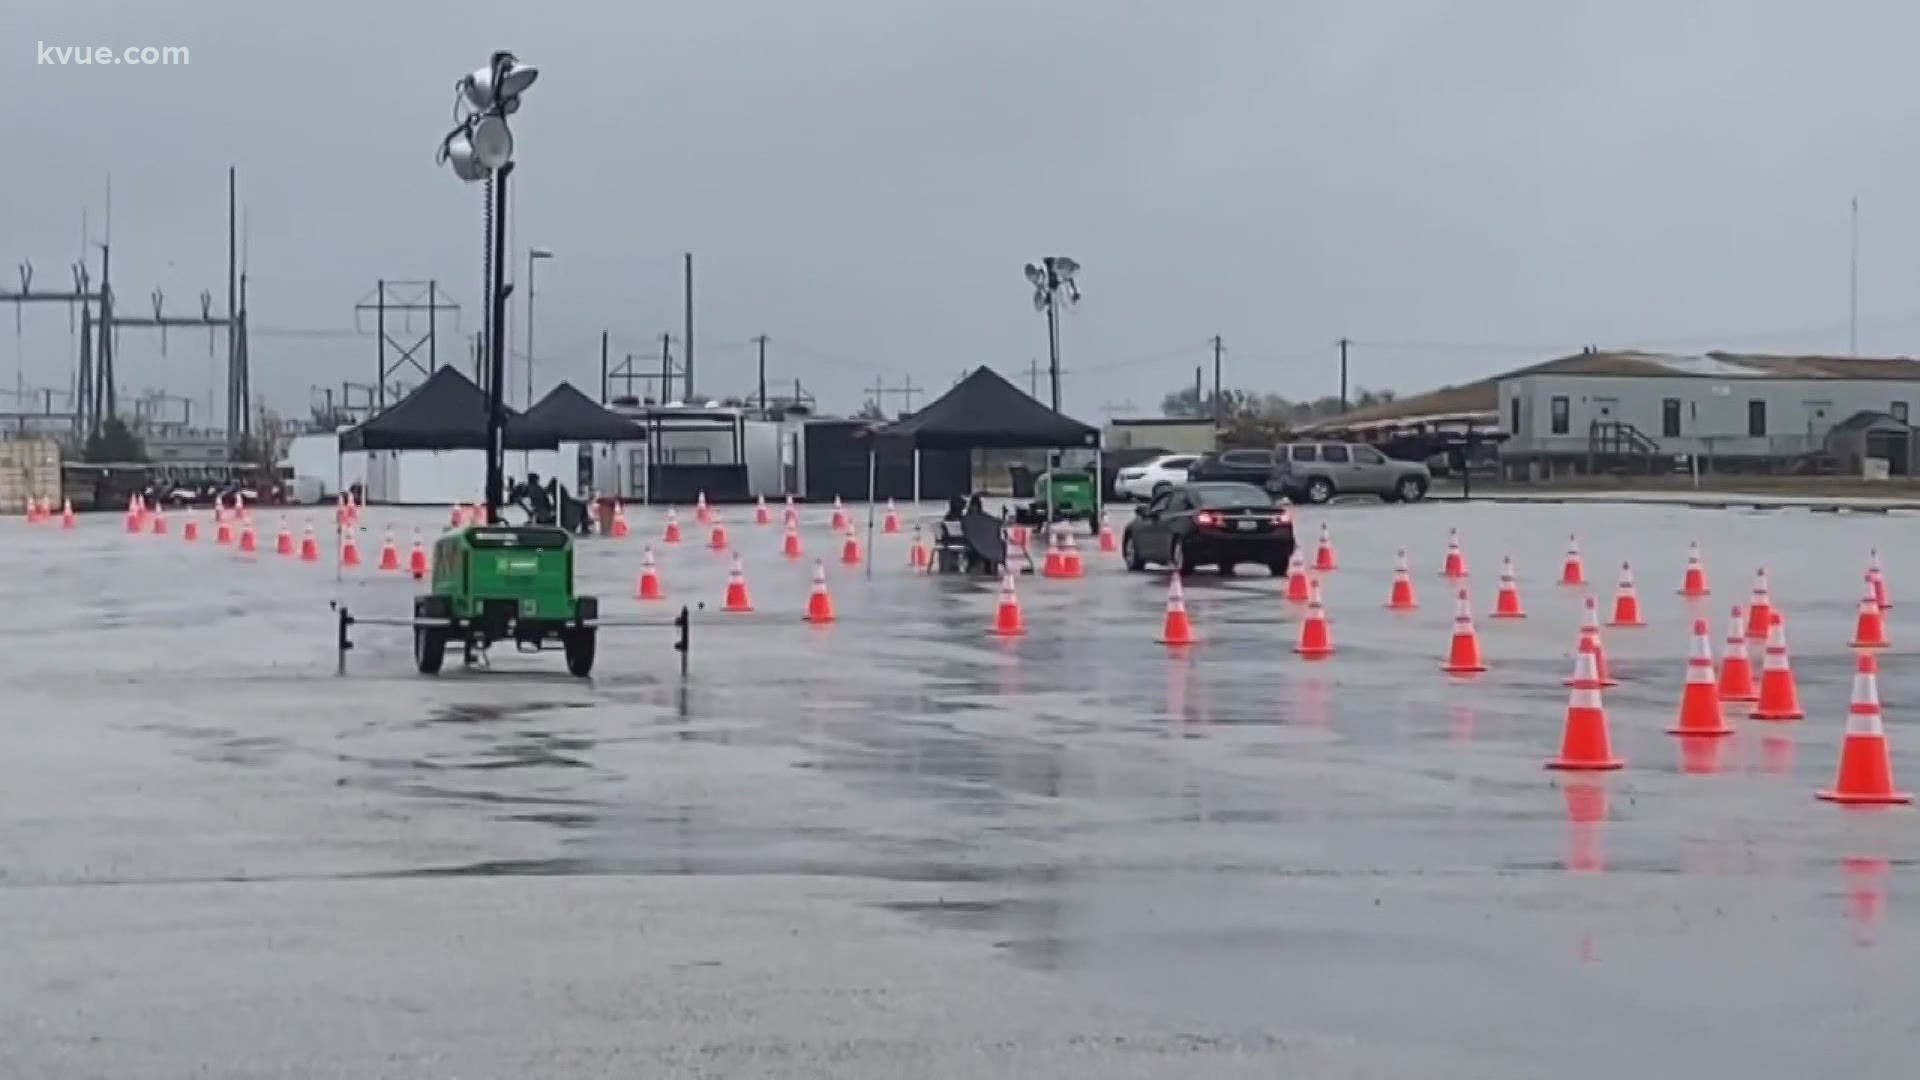 A company called Curative is offering free testing every day through Dec. 6 at Circuit of the Americas.